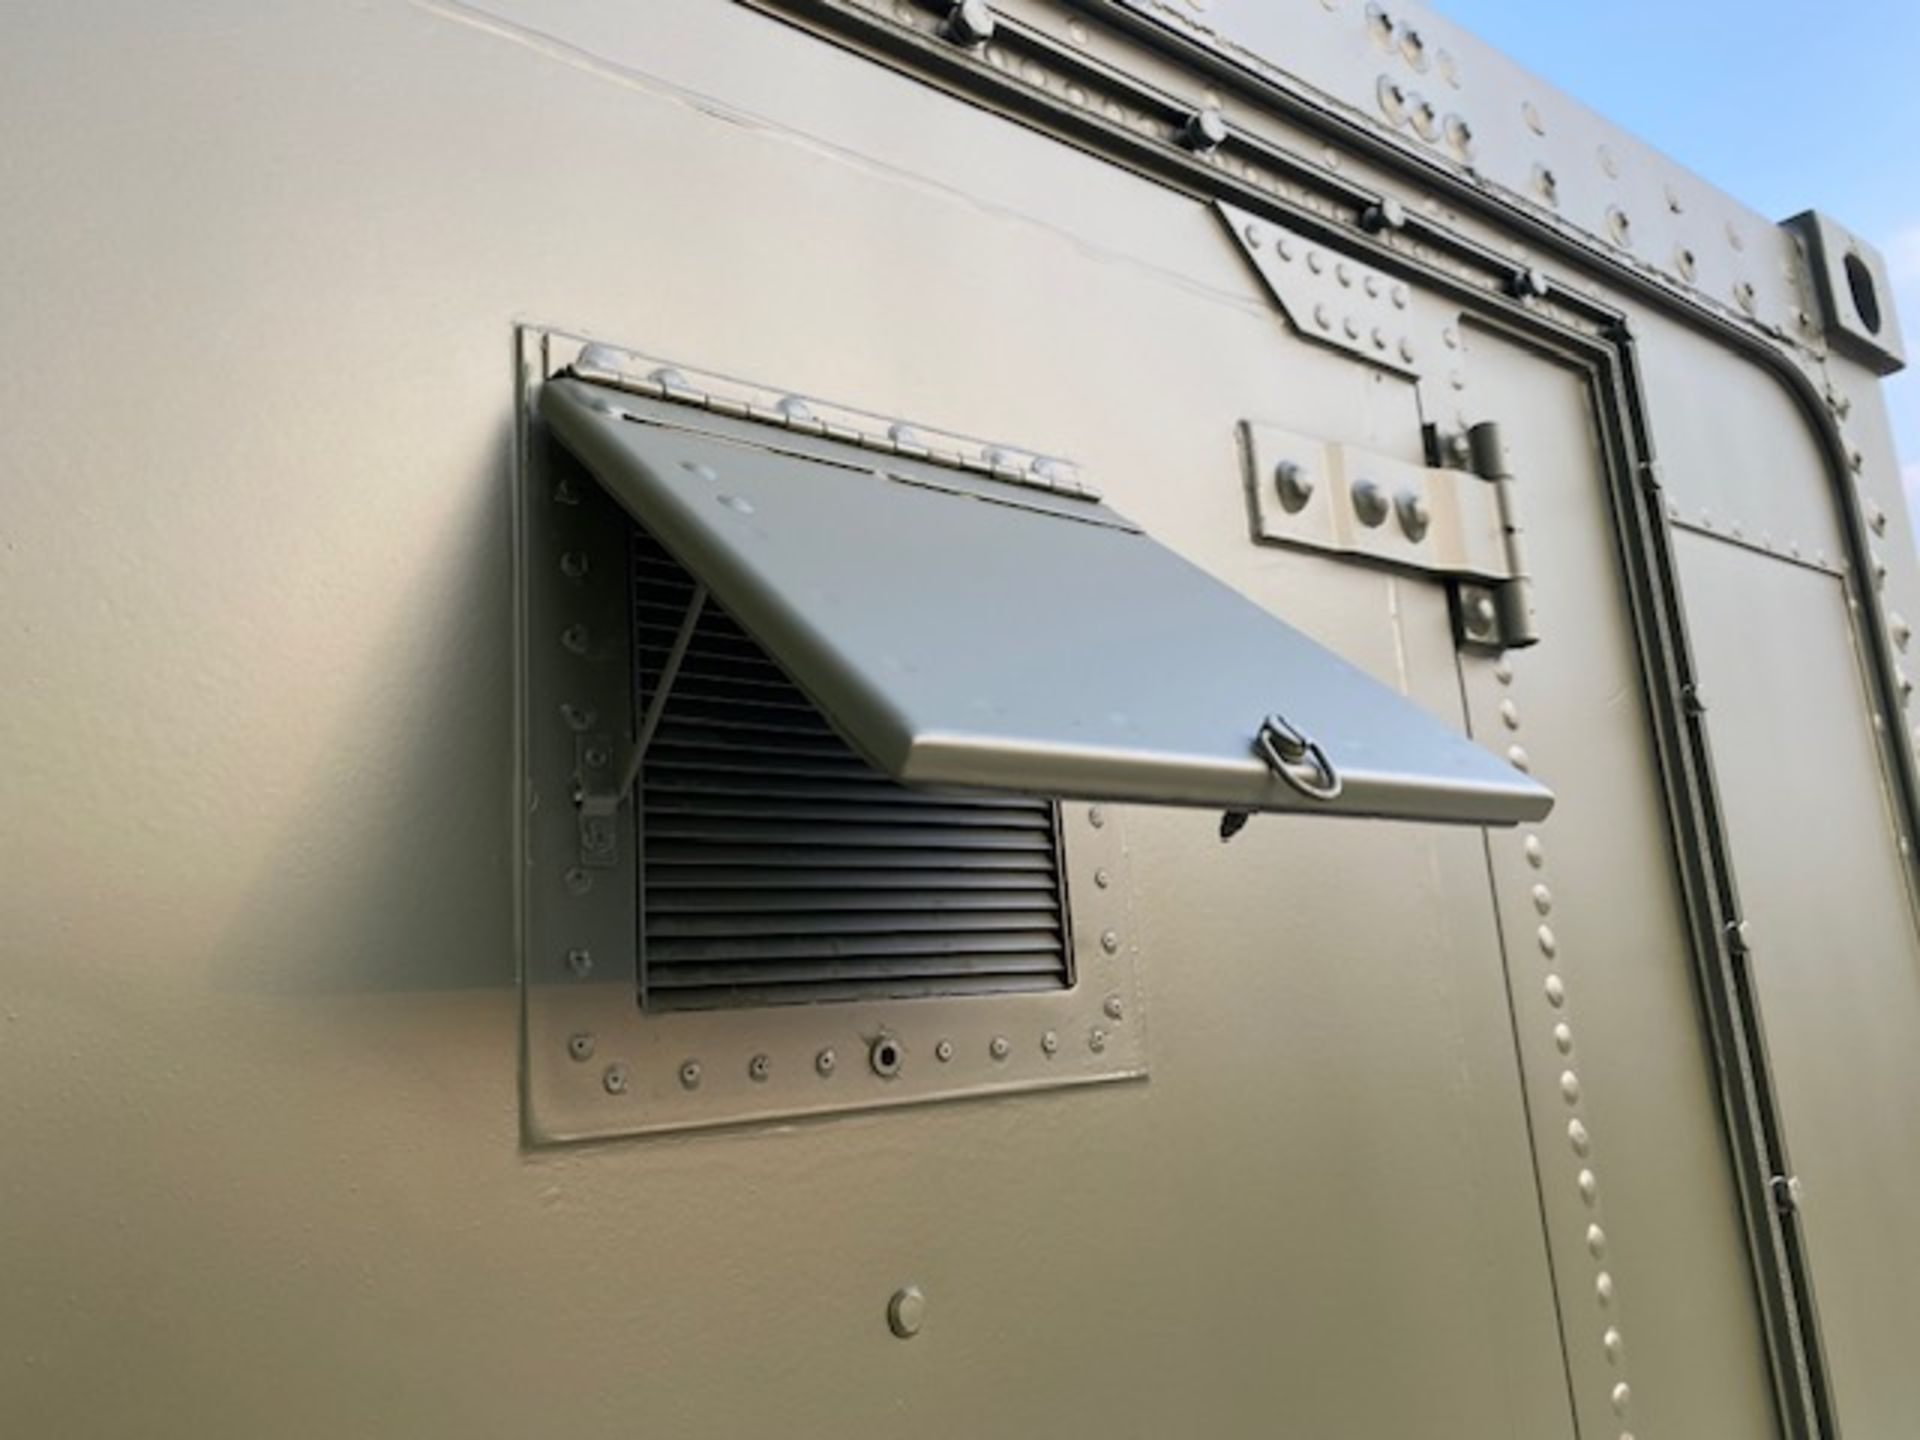 Transportable Lithium-ion Battery Storage & Charging Container From the UK Ministry of Defence - Image 25 of 65